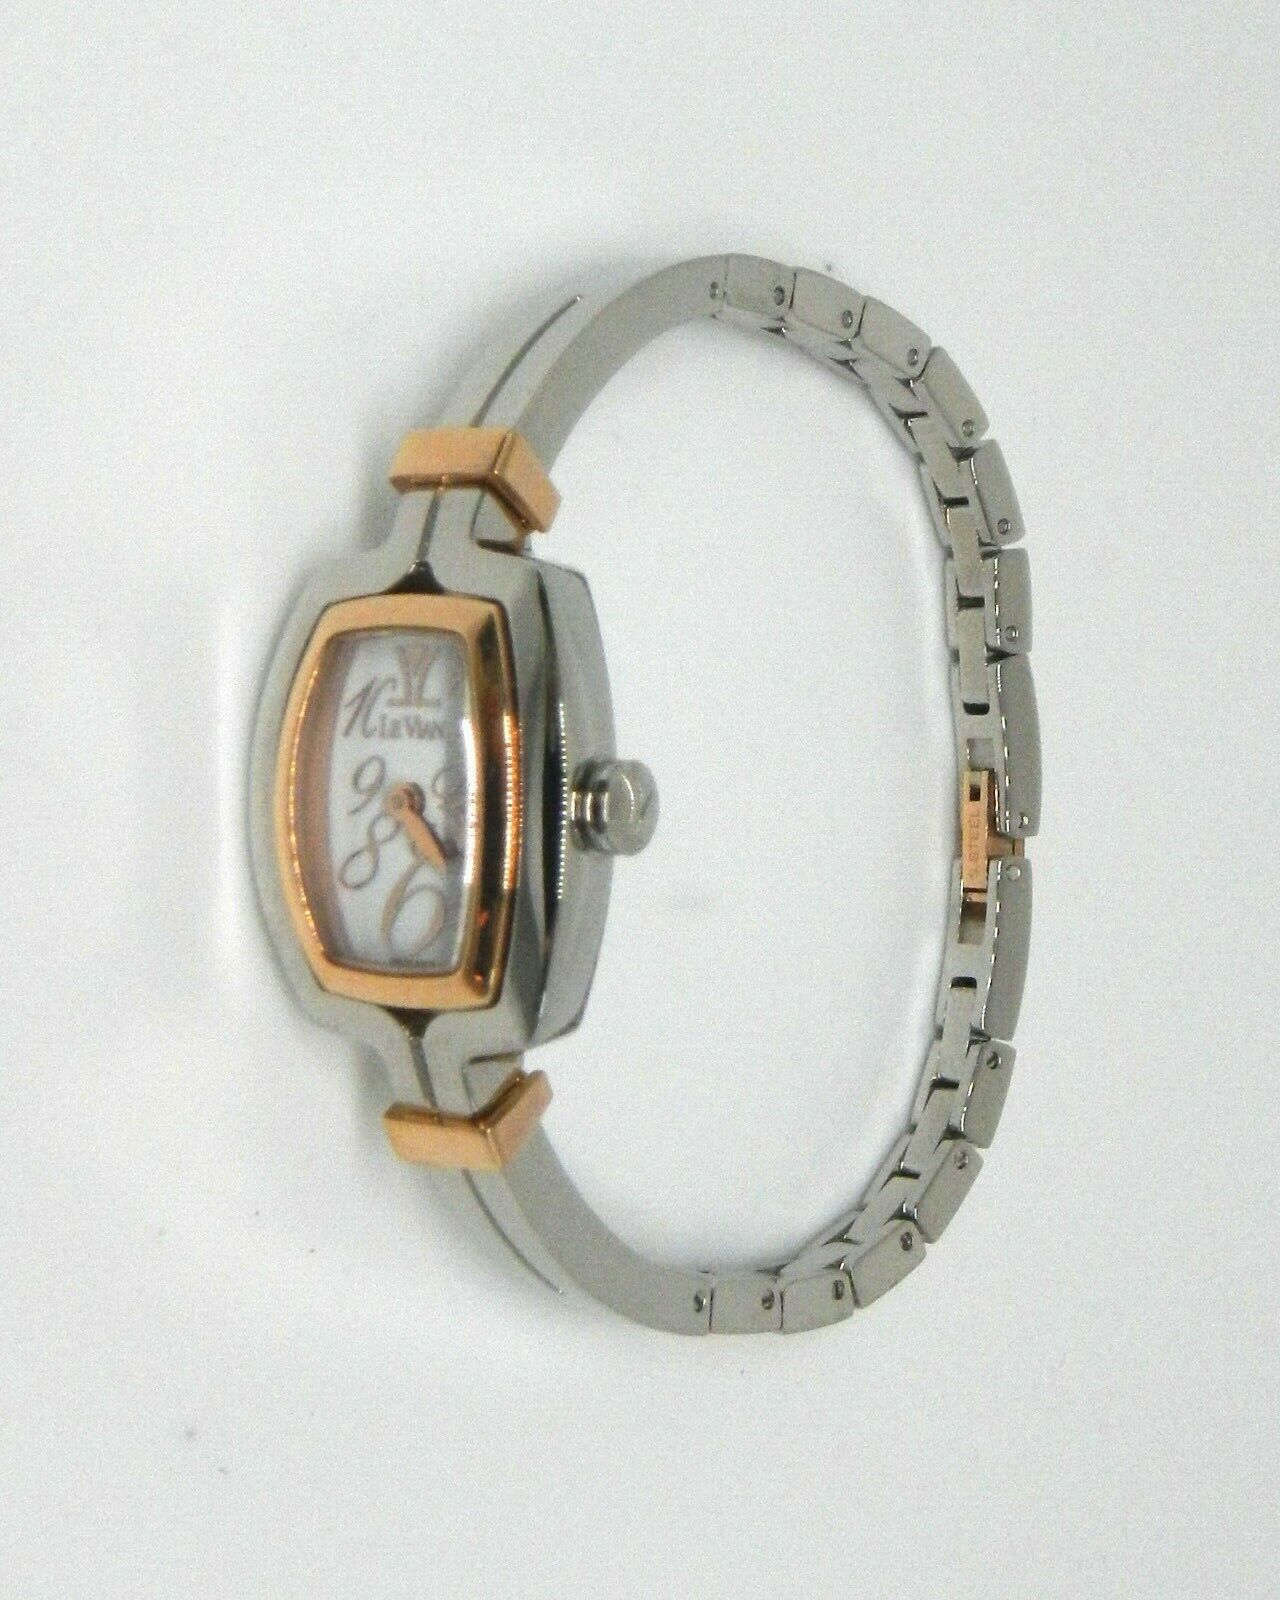 LEVIAN CUSH'N BANGLE LADIES TWO TONE STAINESS STEEL WATCH ZELA 40